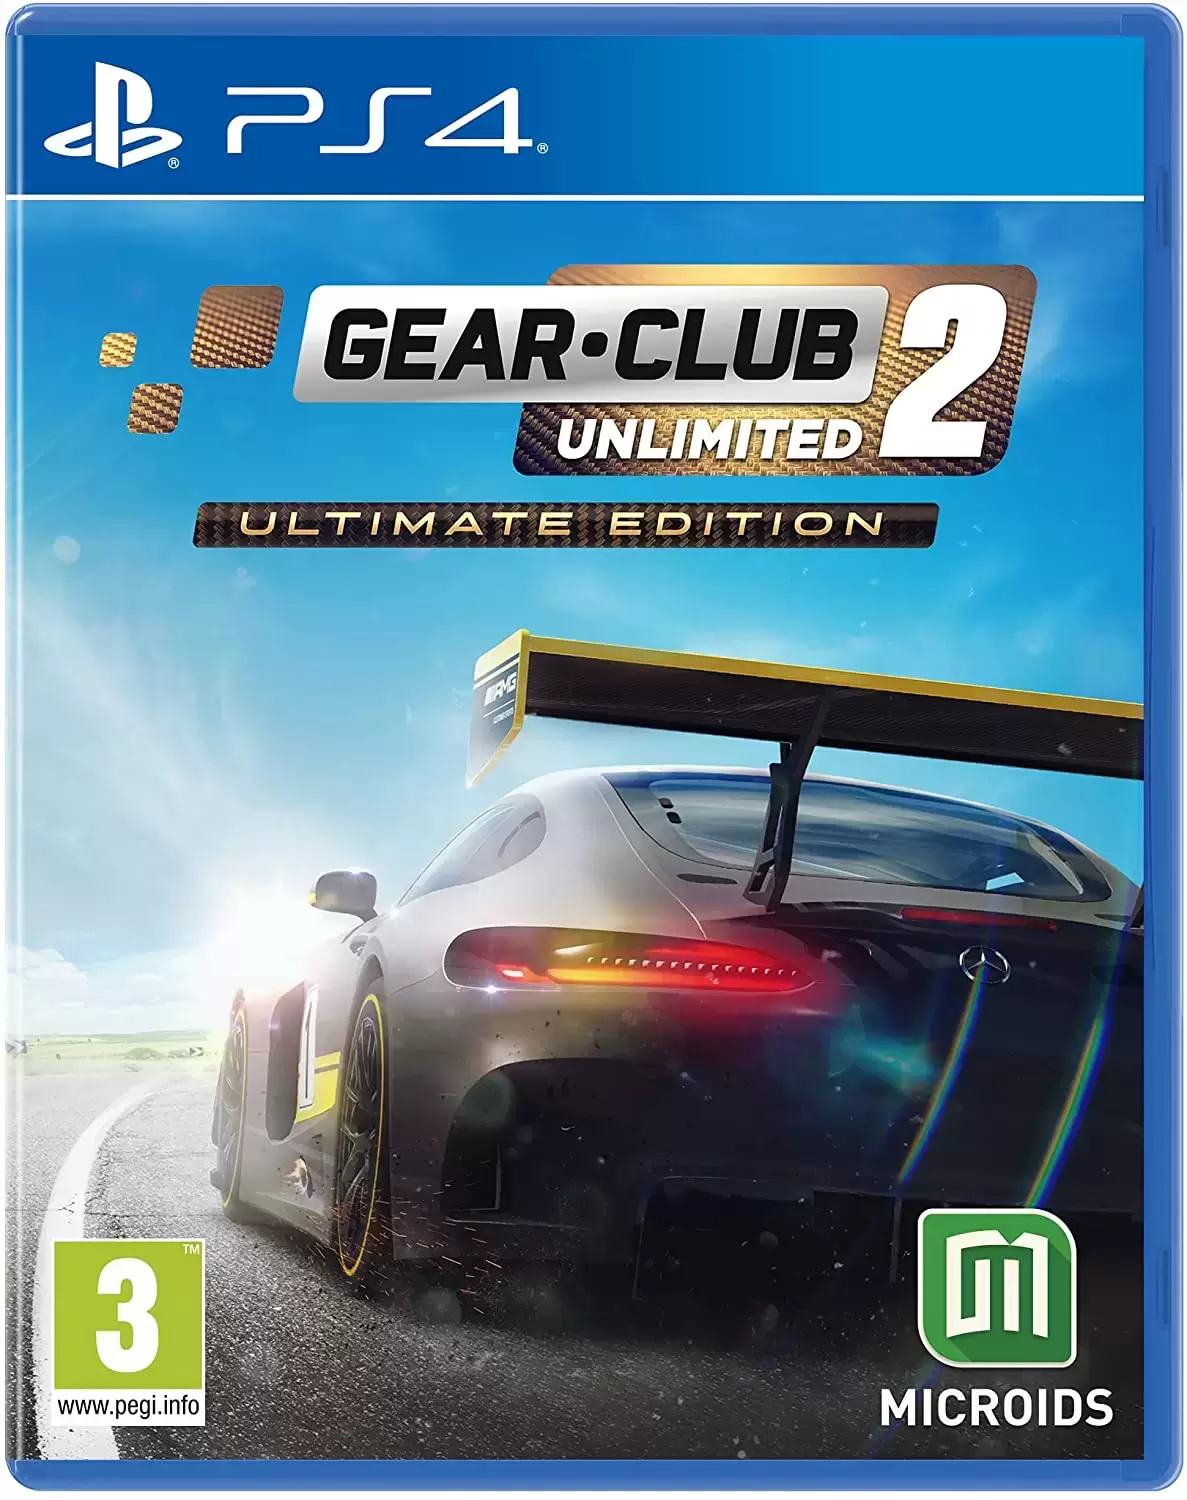 PS4 Games - Gear Club 2 Unlimited 2 Ultimate Edition